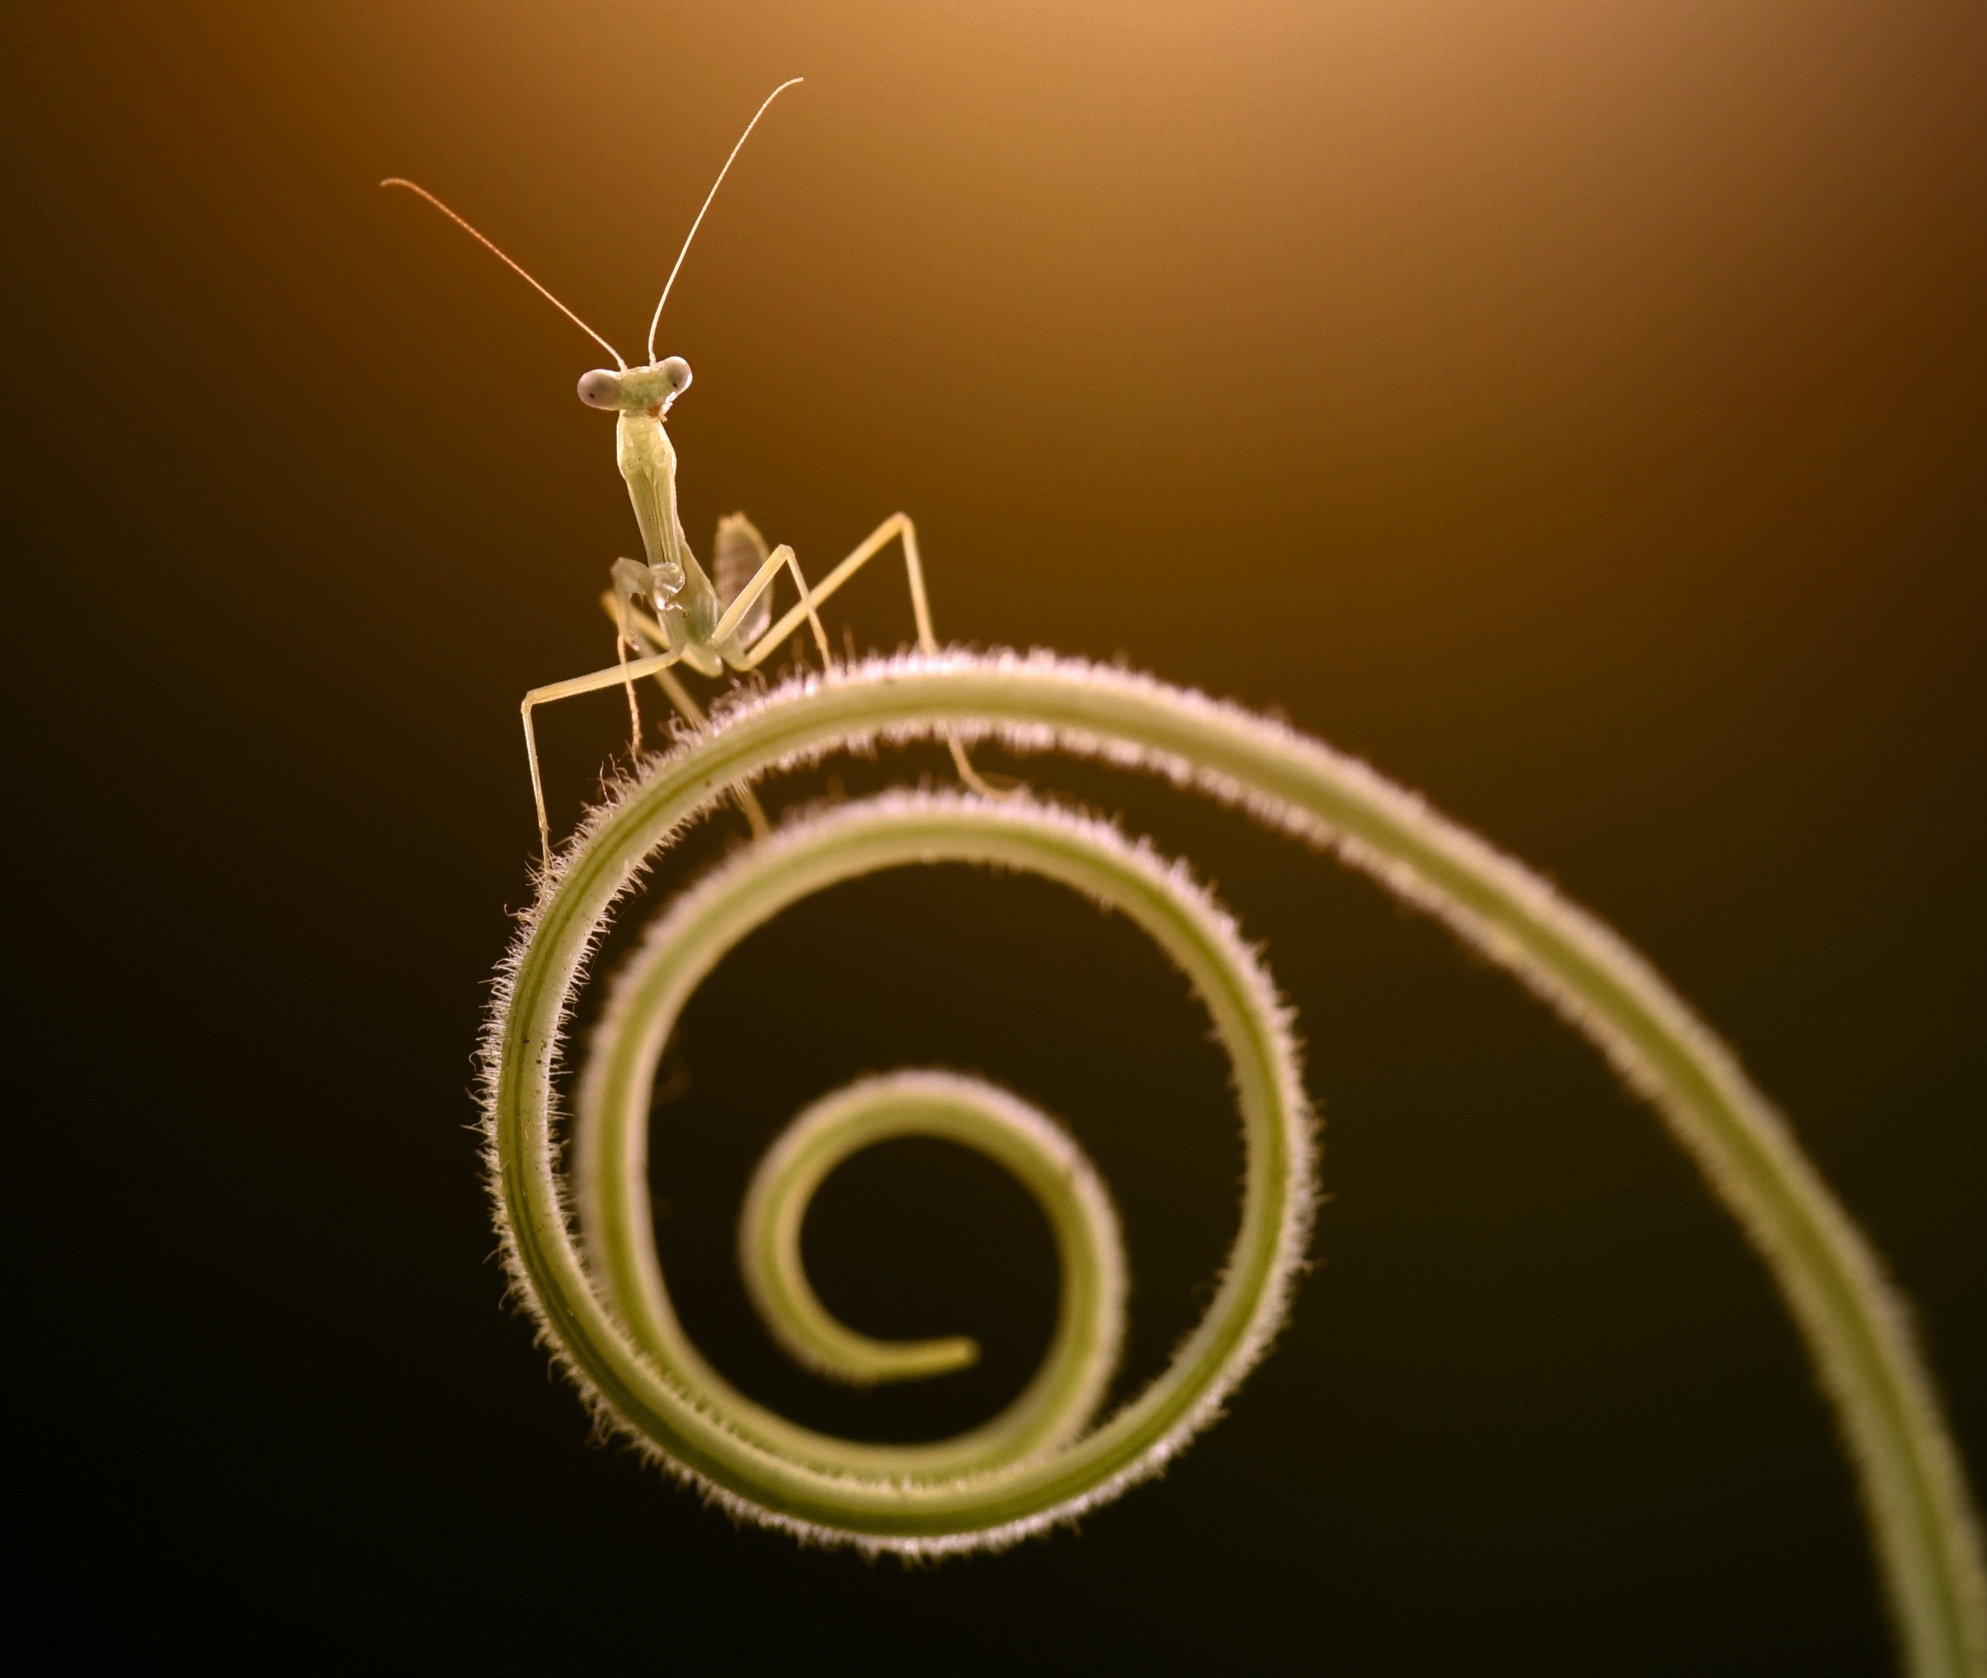 Image: Insect, bug, coil, spiral, plant, sitting